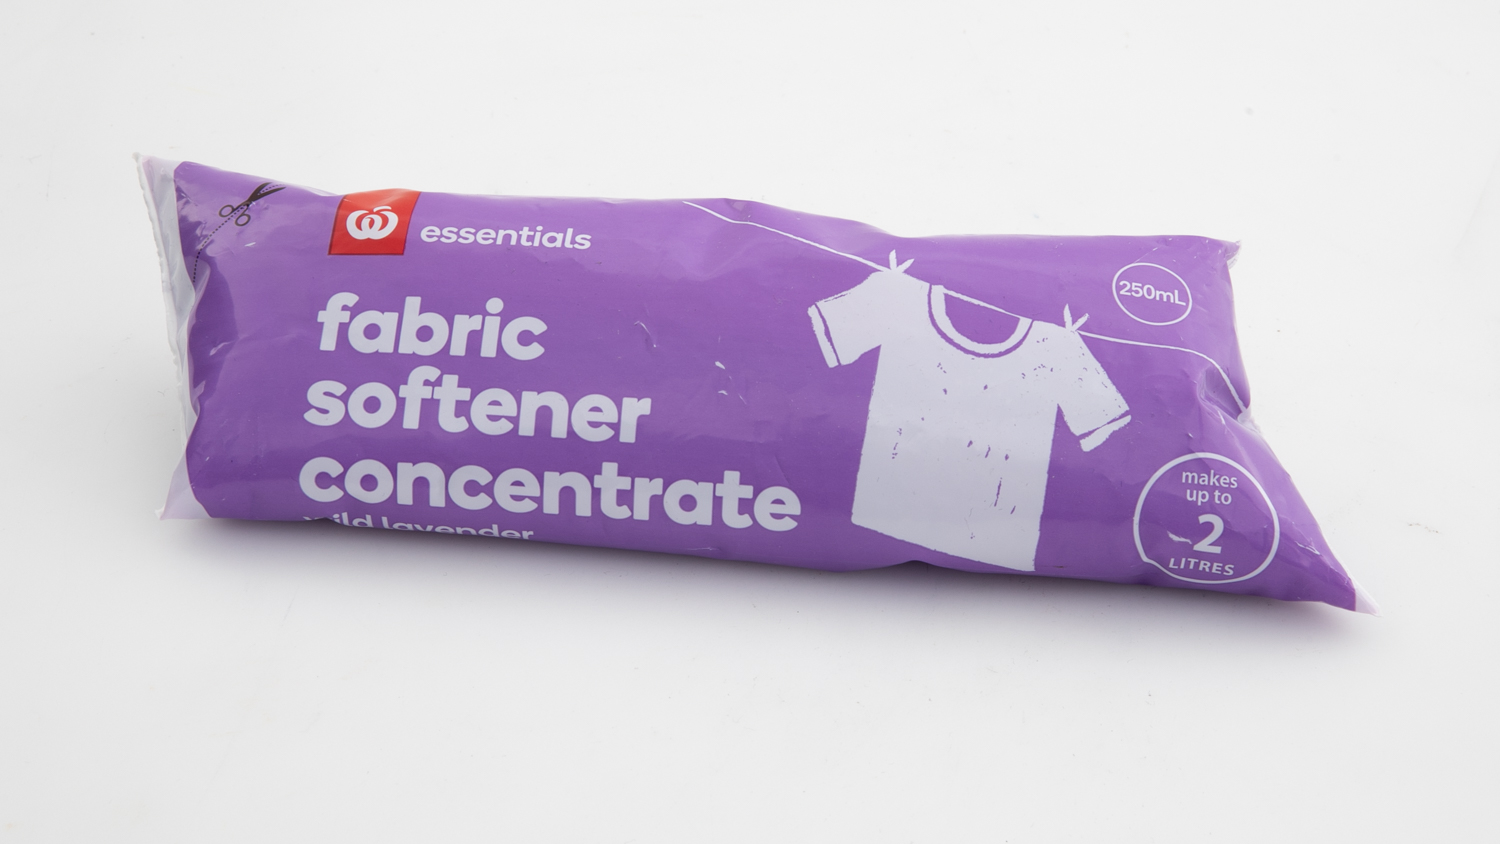 Woolworths Essentials Fabric Softener Concentrate Wild Lavender carousel image